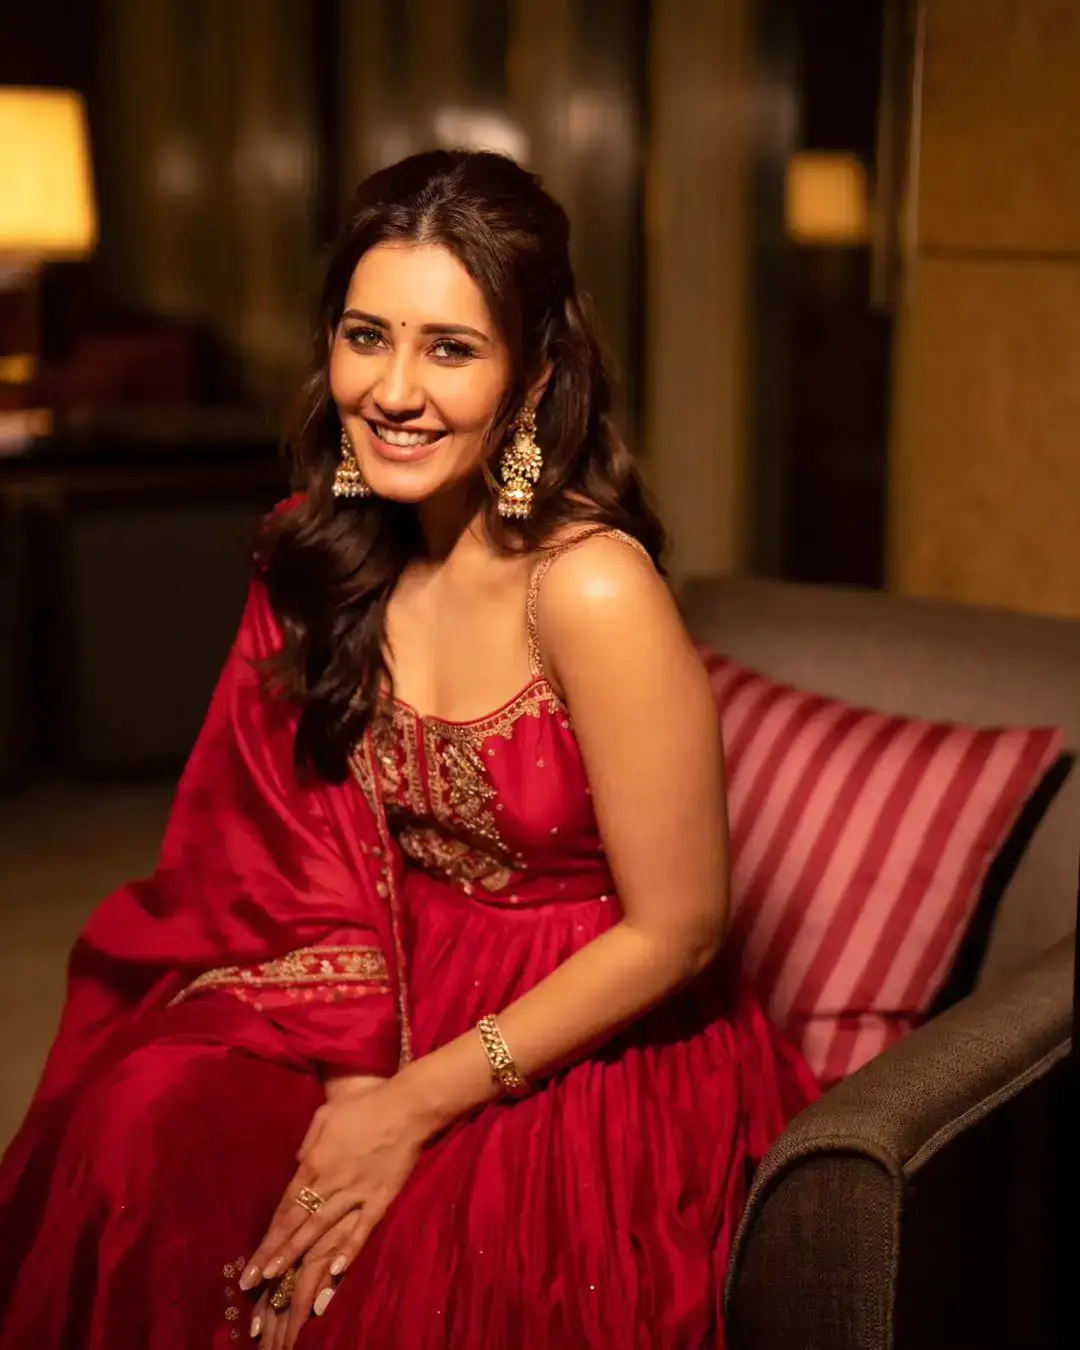 Raashi Khanna Mesmerizing Looks In Beautiful Red Gown